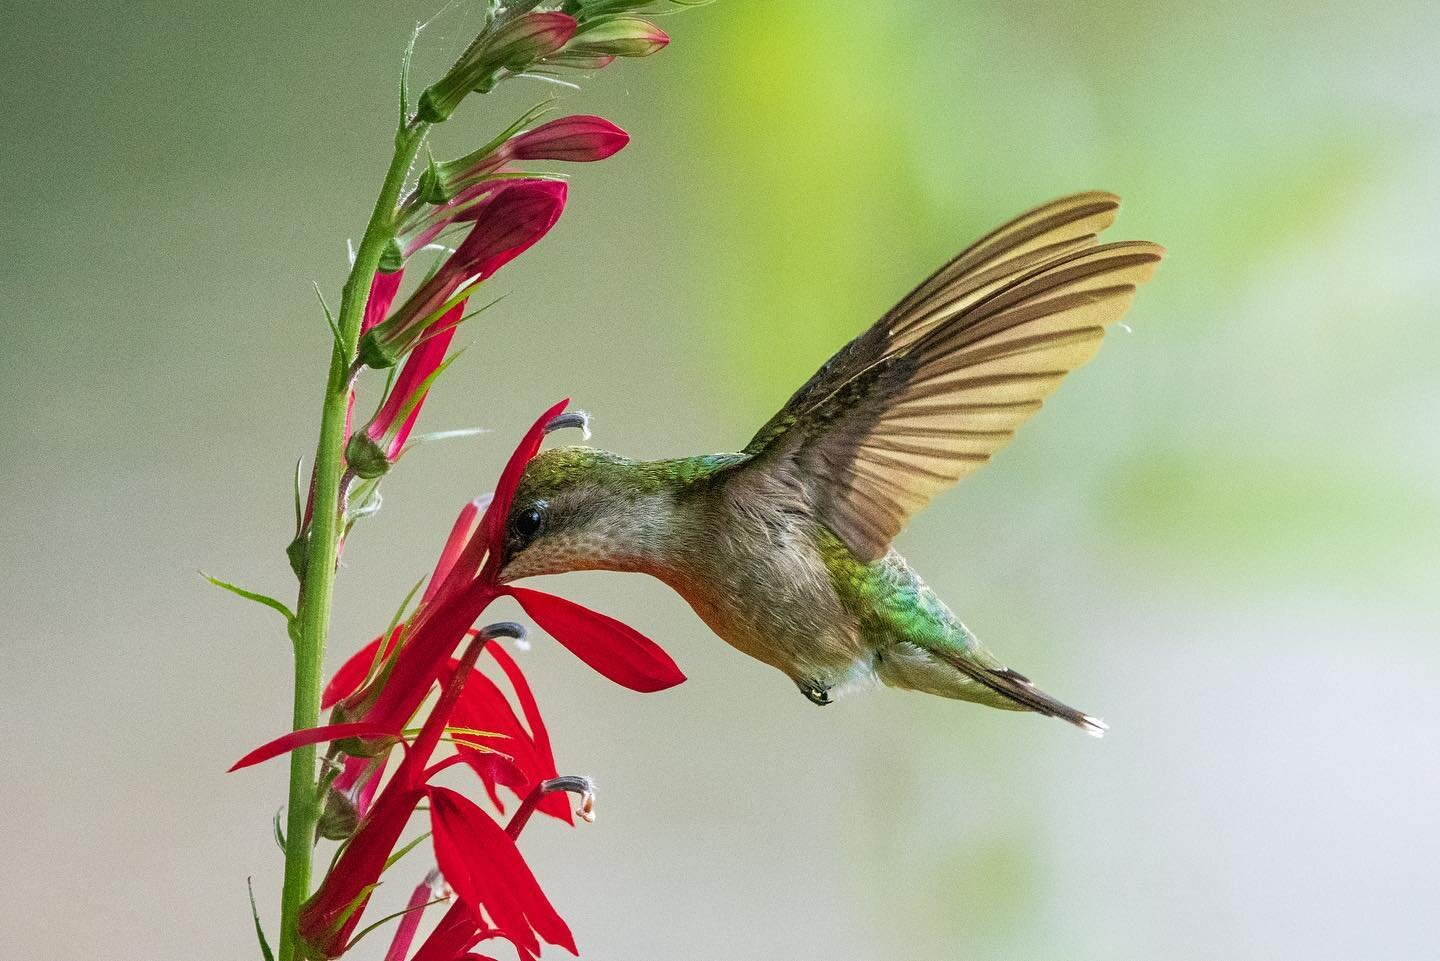 SWIPE 👉🏼 for a closer view

A female ruby-throated hummingbird stops to feed on nectar from a cardinal flower 🌺 

I was incredibly lucky to get this shot. I had been waiting near a patch of the flowers which I knew attracted hummingbirds when I&rs